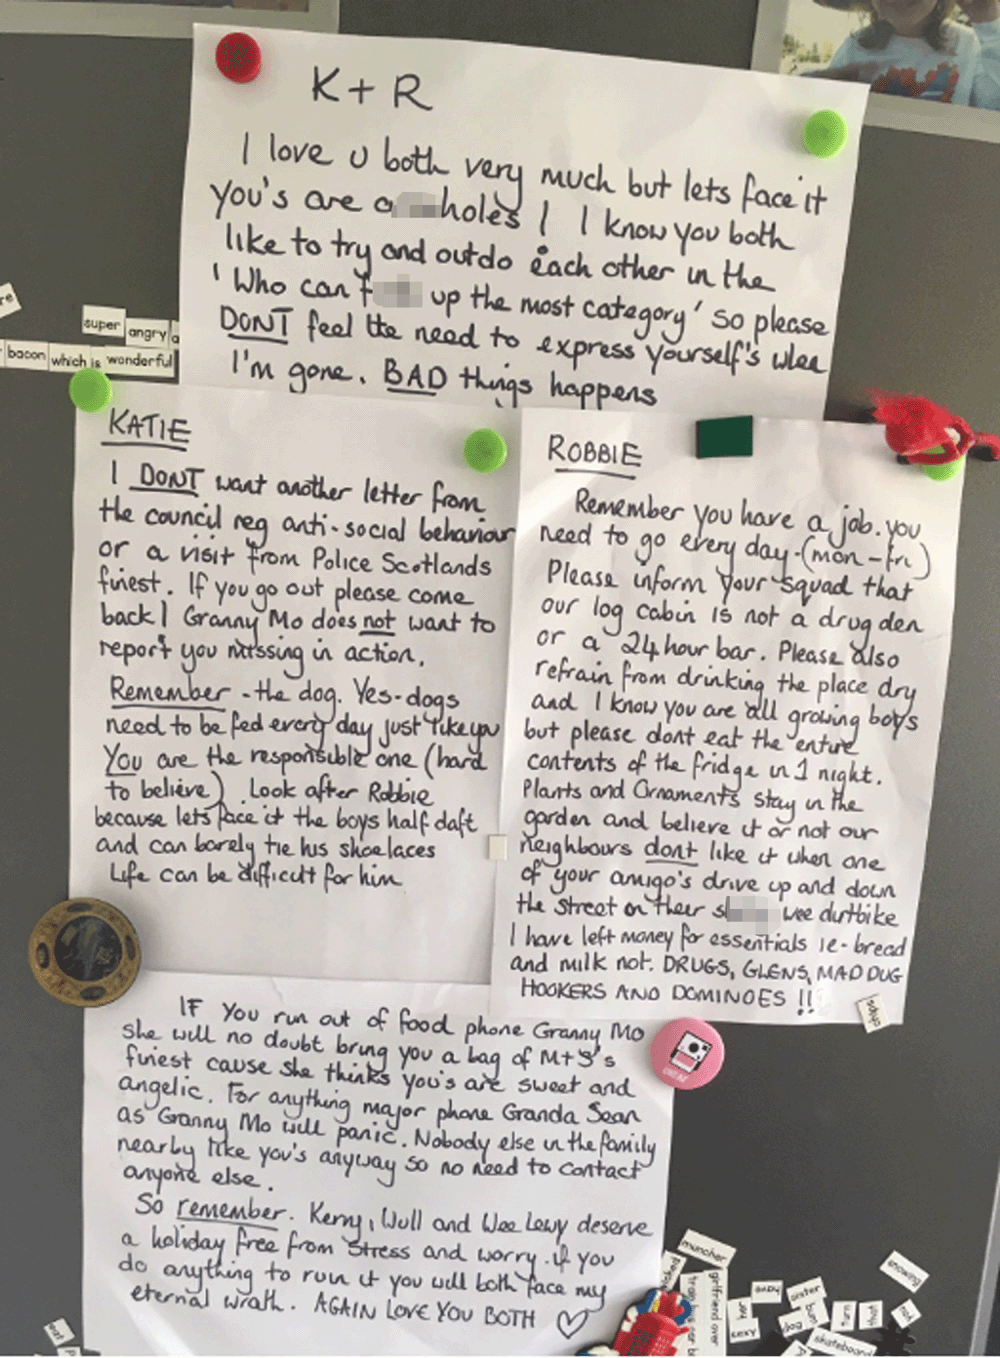 The hilarious note told Robbie and his sister  to, "Try not to outdo each other in who can f*** up the most category".